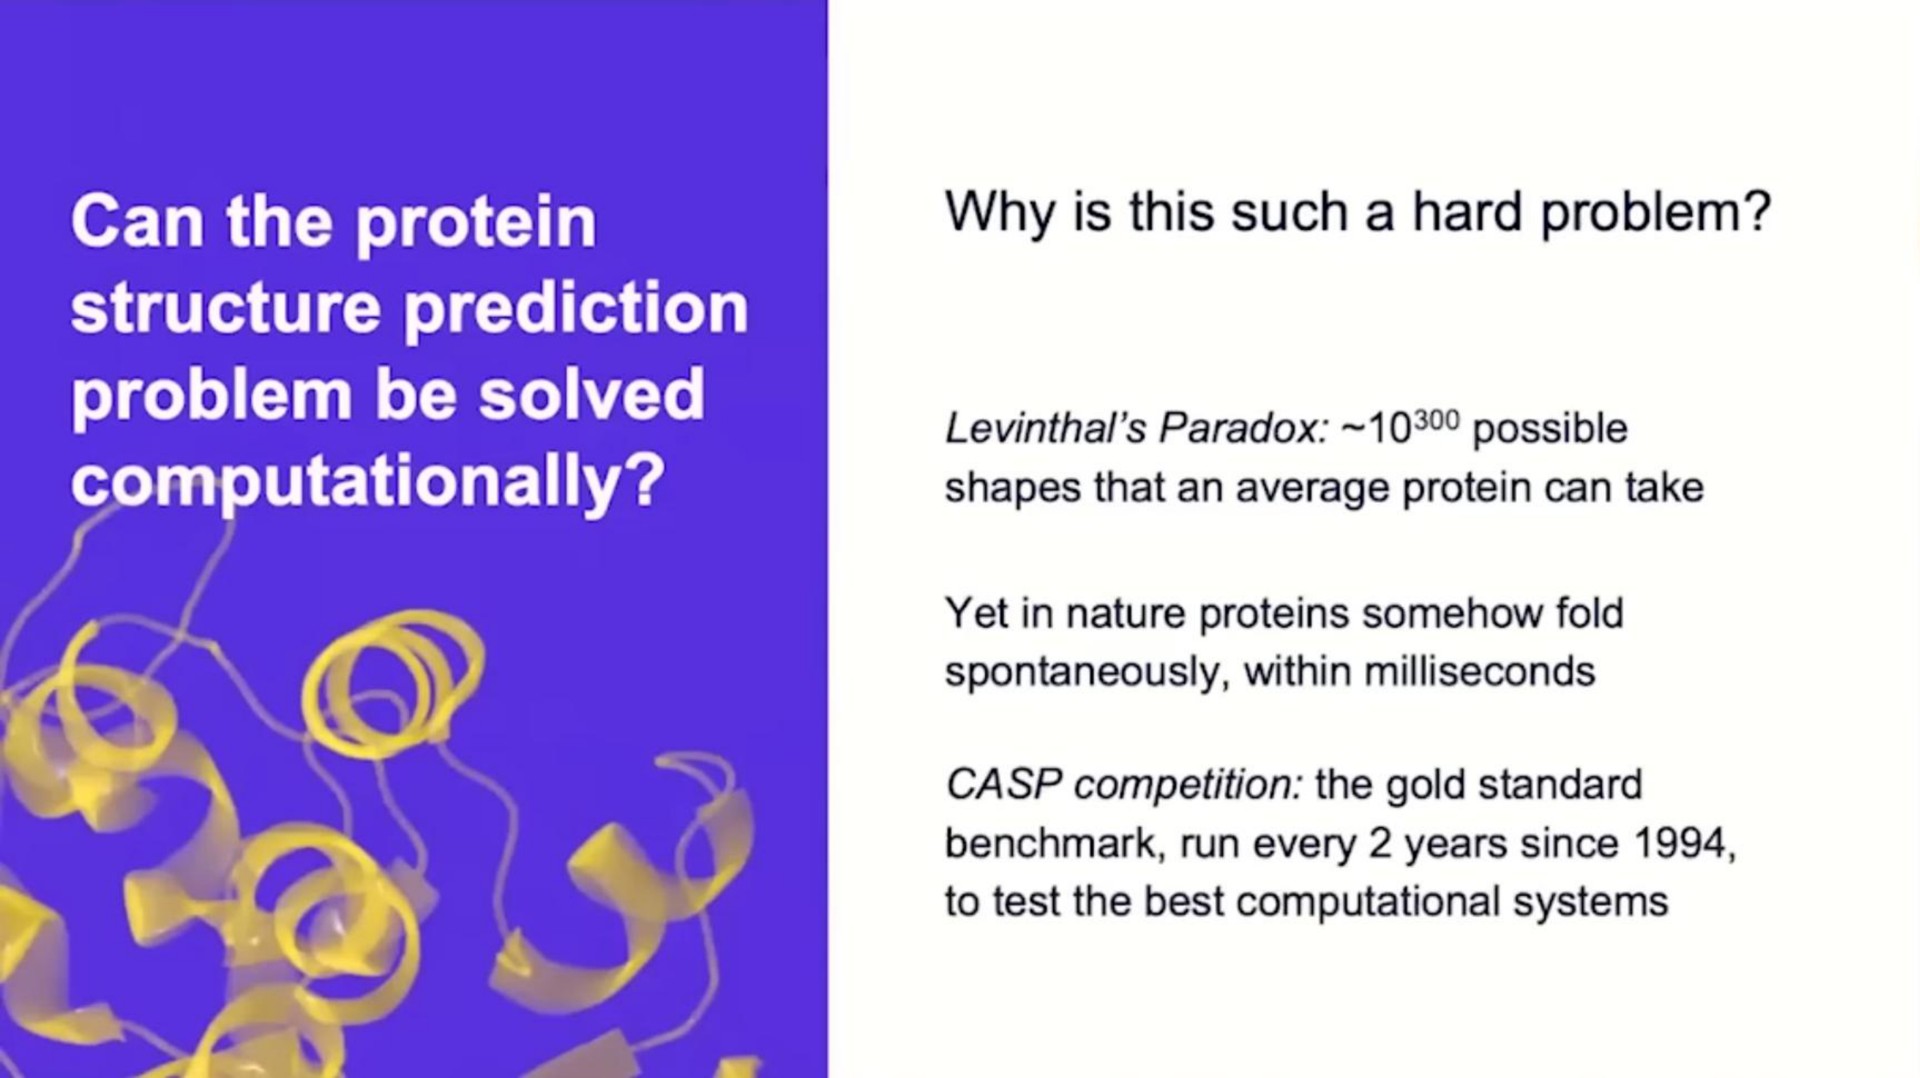 can the protein structure prediction problem be solved why is this such a hard problem paradox possible shapes that an average protein can take yet in nature proteins somehow fold spontaneously within milliseconds competition the gold standard run every years since to test the best computational systems | DeepMind